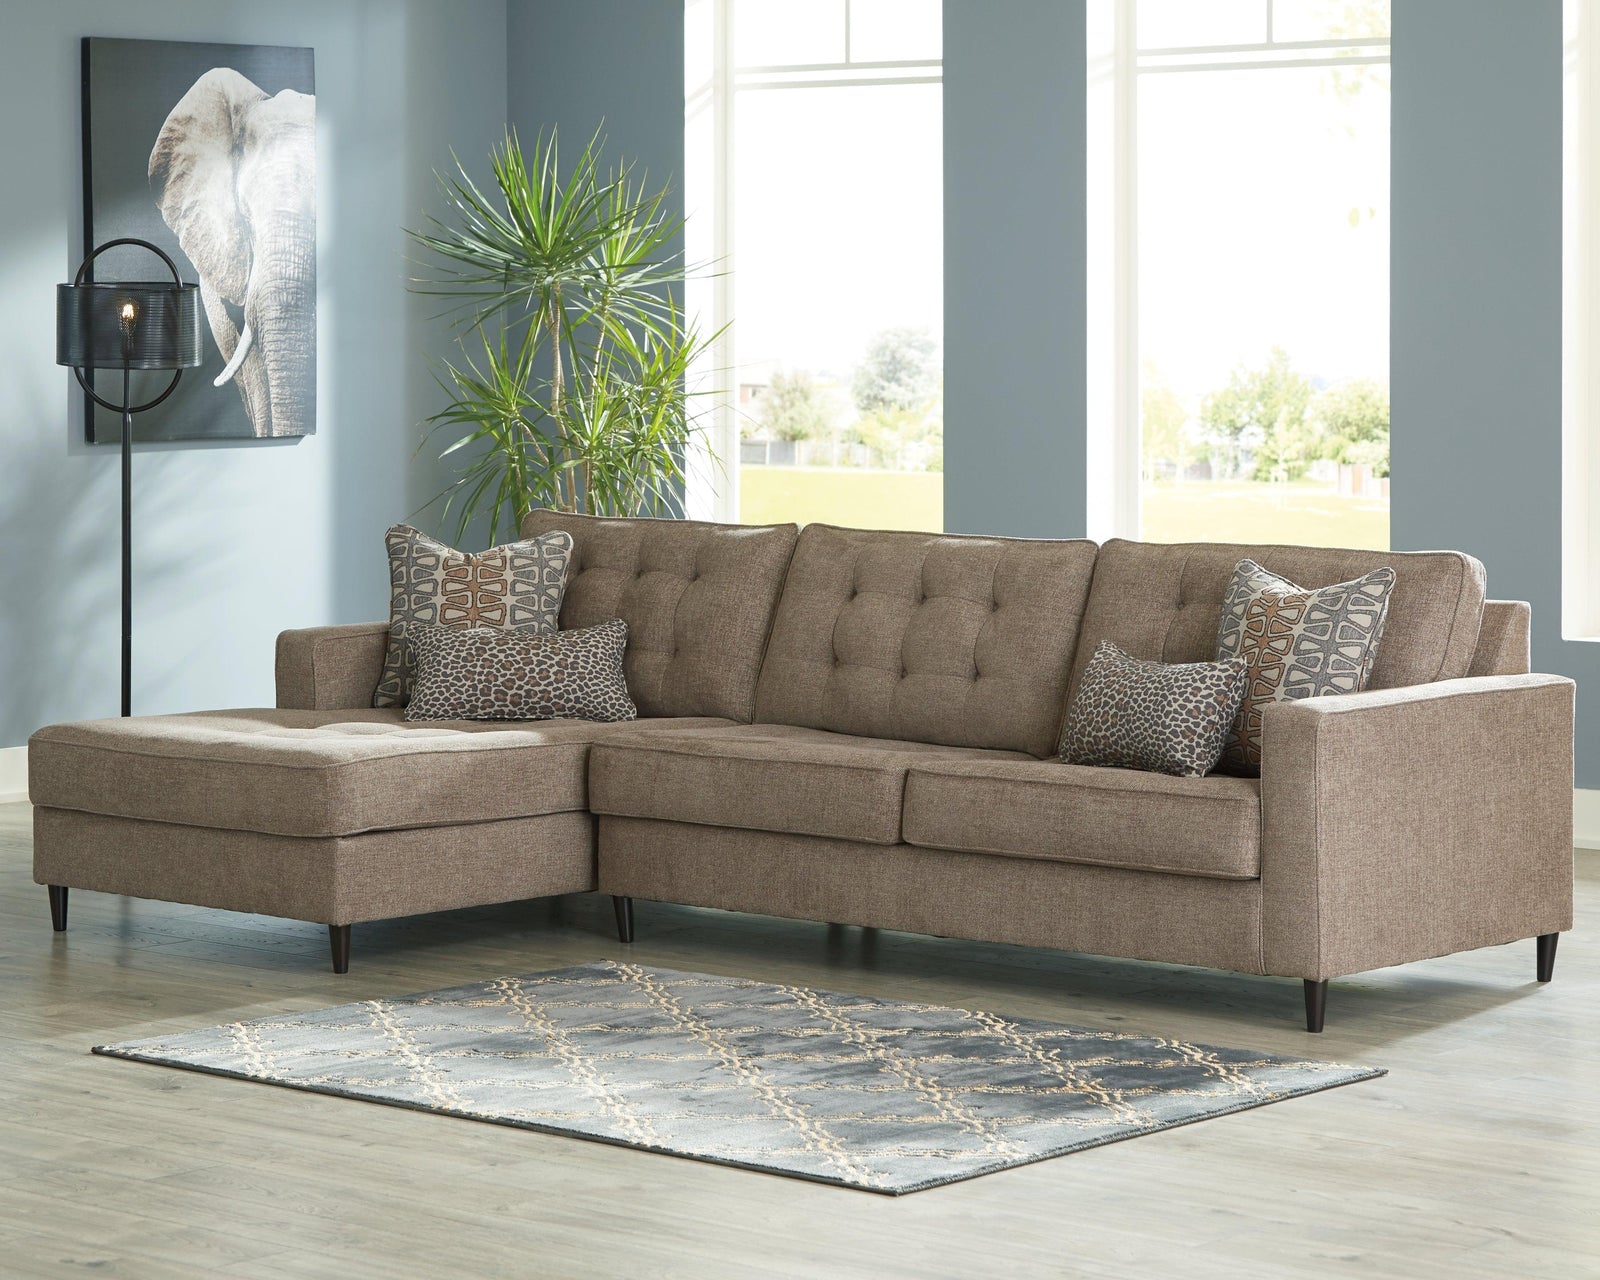 Flintshire Auburn Textured 2-Piece Sectional With Chaise